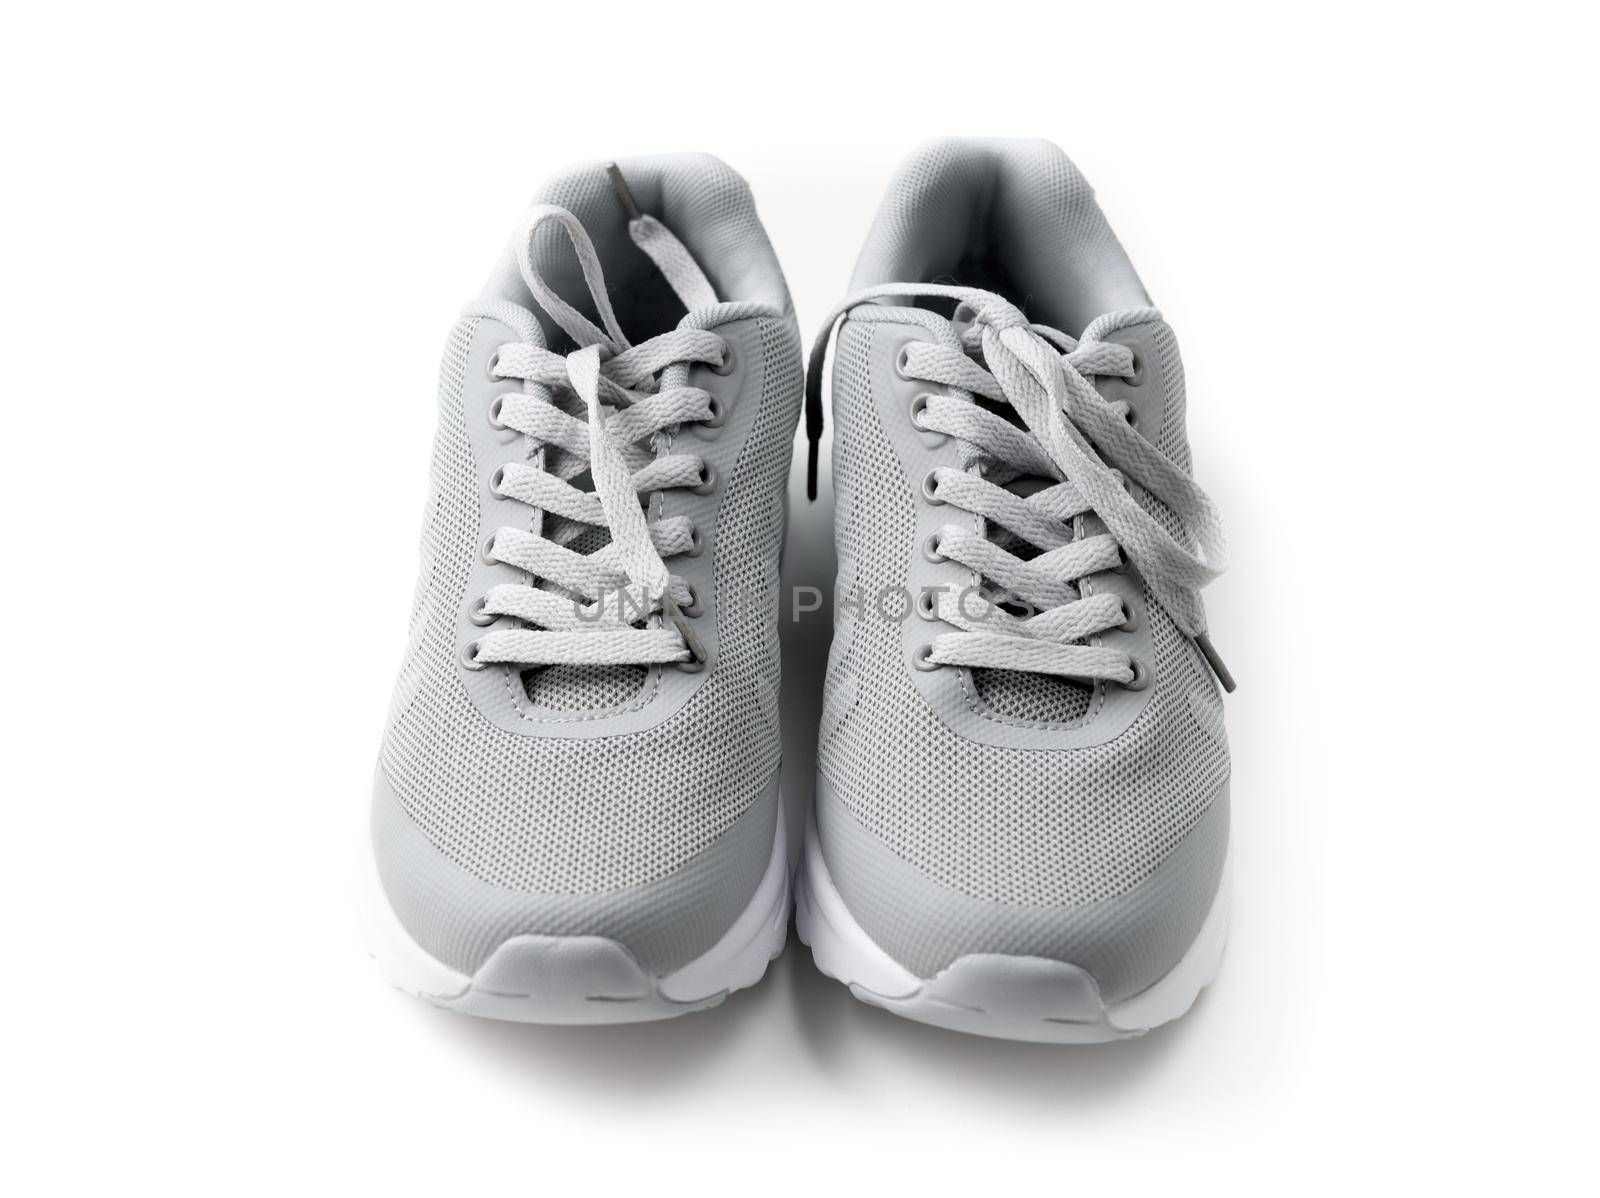 Gray cozy running shoes sitting on wood by tan4ikk1